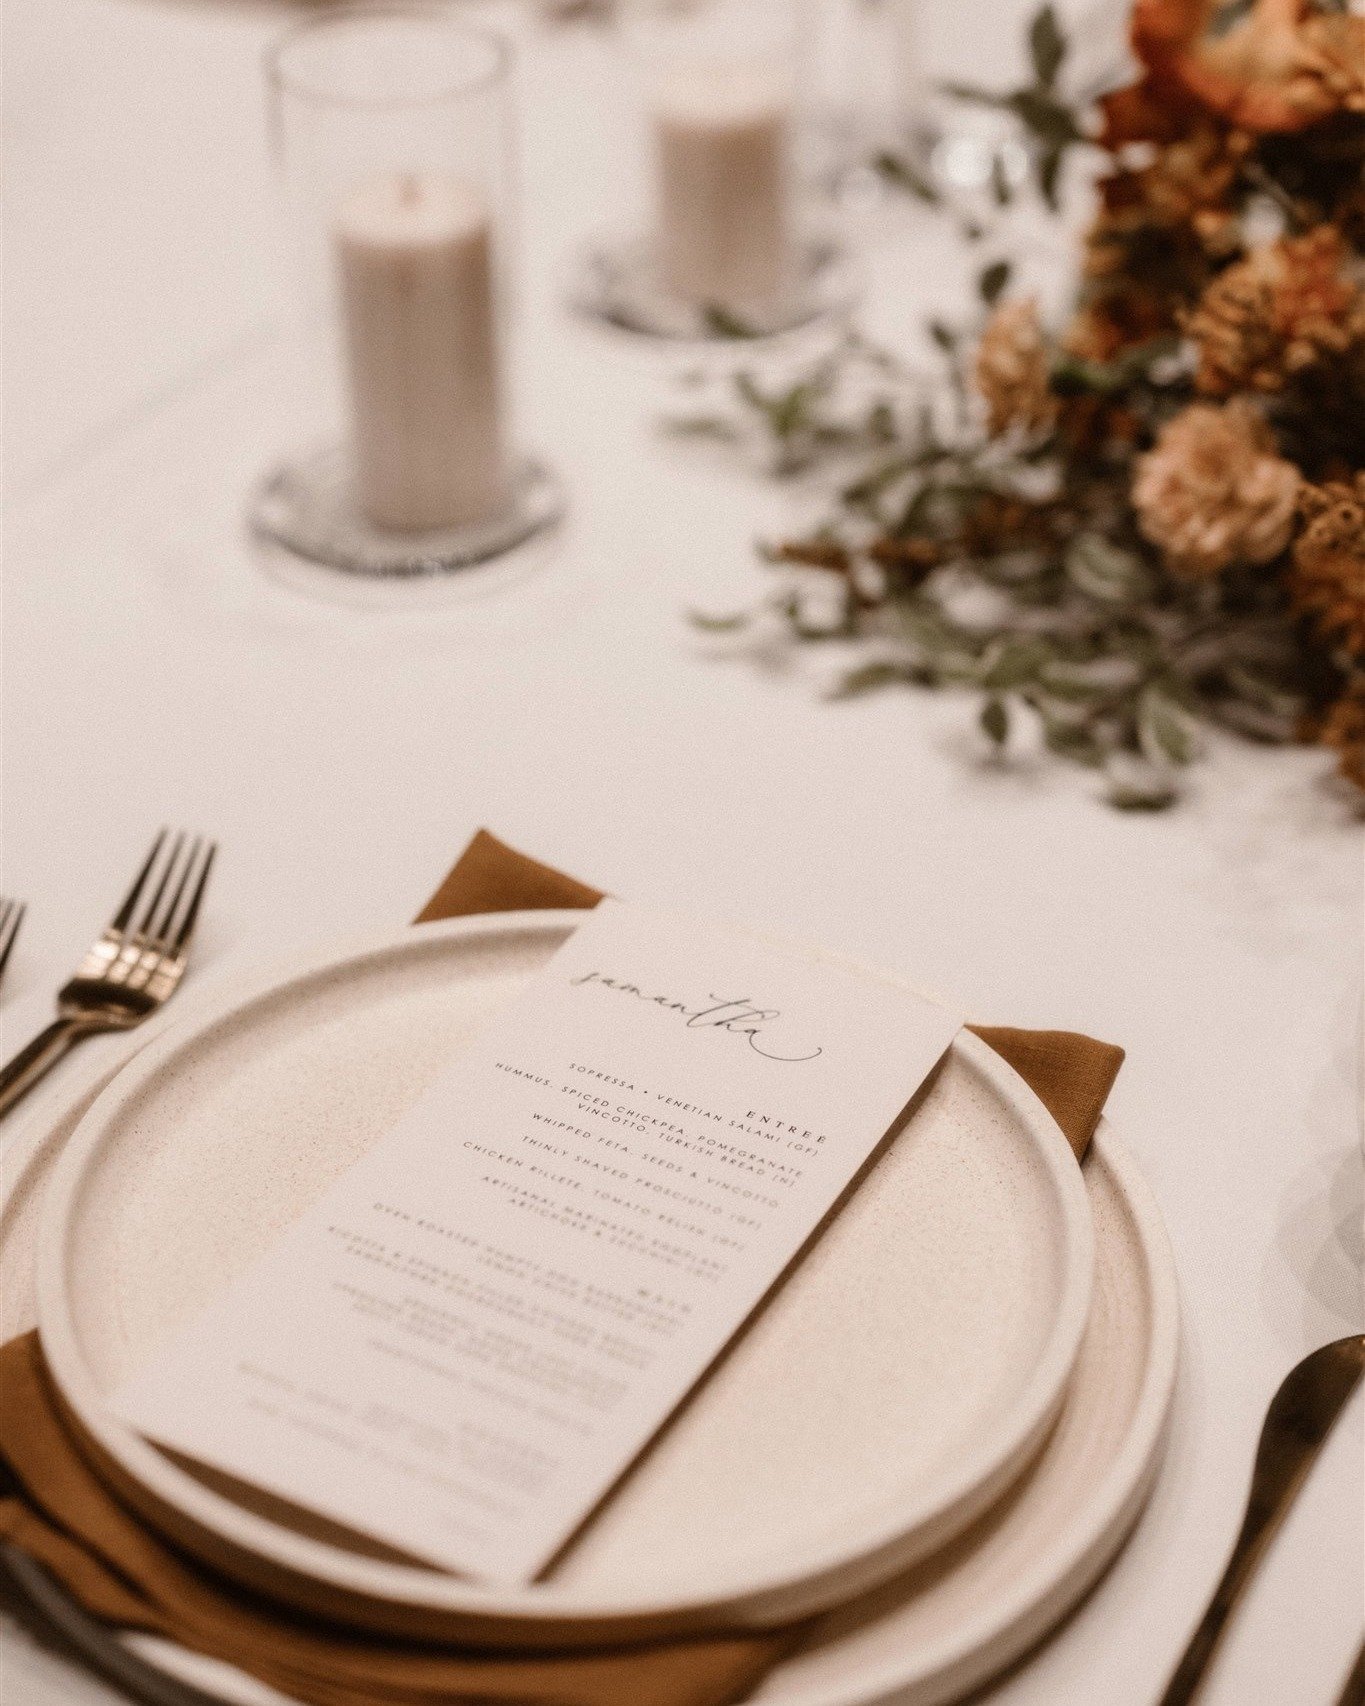 Dinner table details for this beautiful Sandalford wedding for S+E.

Photos by @annimariaphotography 

Tableware @sideserve 
Table lamps @festoon_lighting 
Florals @wyldbloom.collective 
Design &amp; styling by us, @little.things.events 

Want a gorg